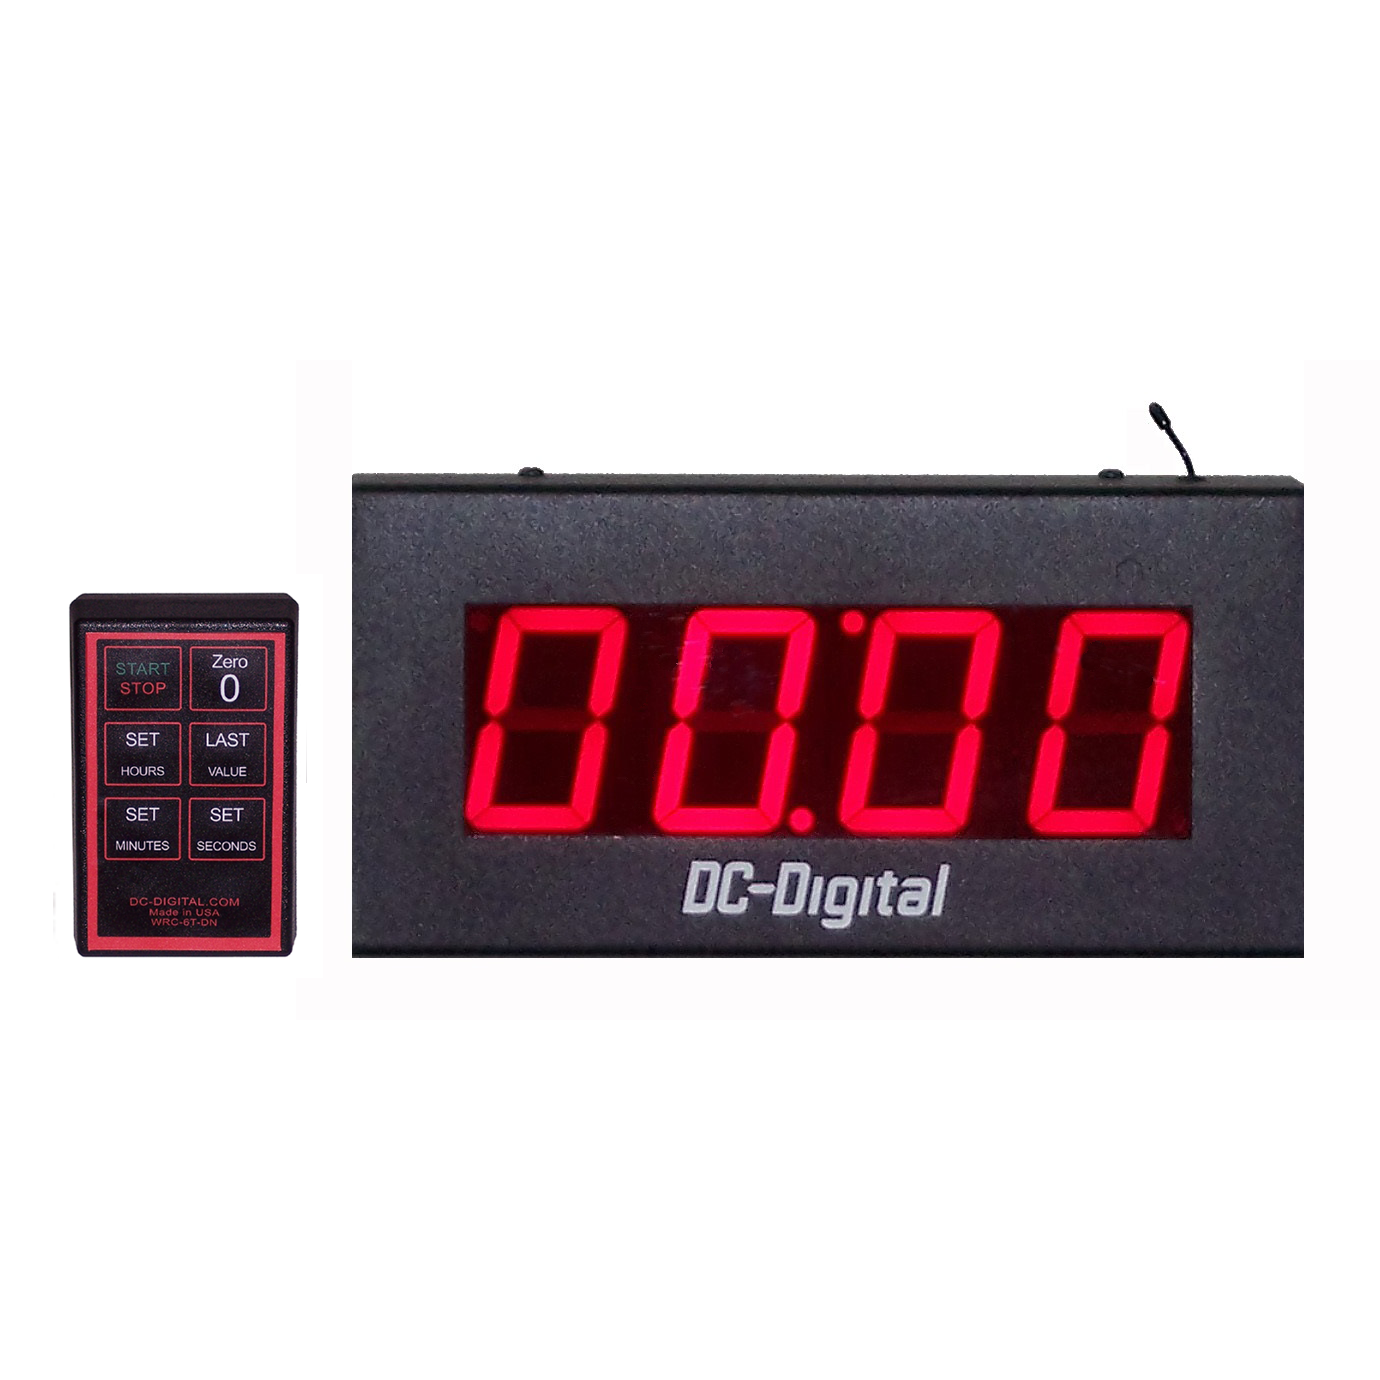 Looping digital countdown timer that counts back up after reaching zero